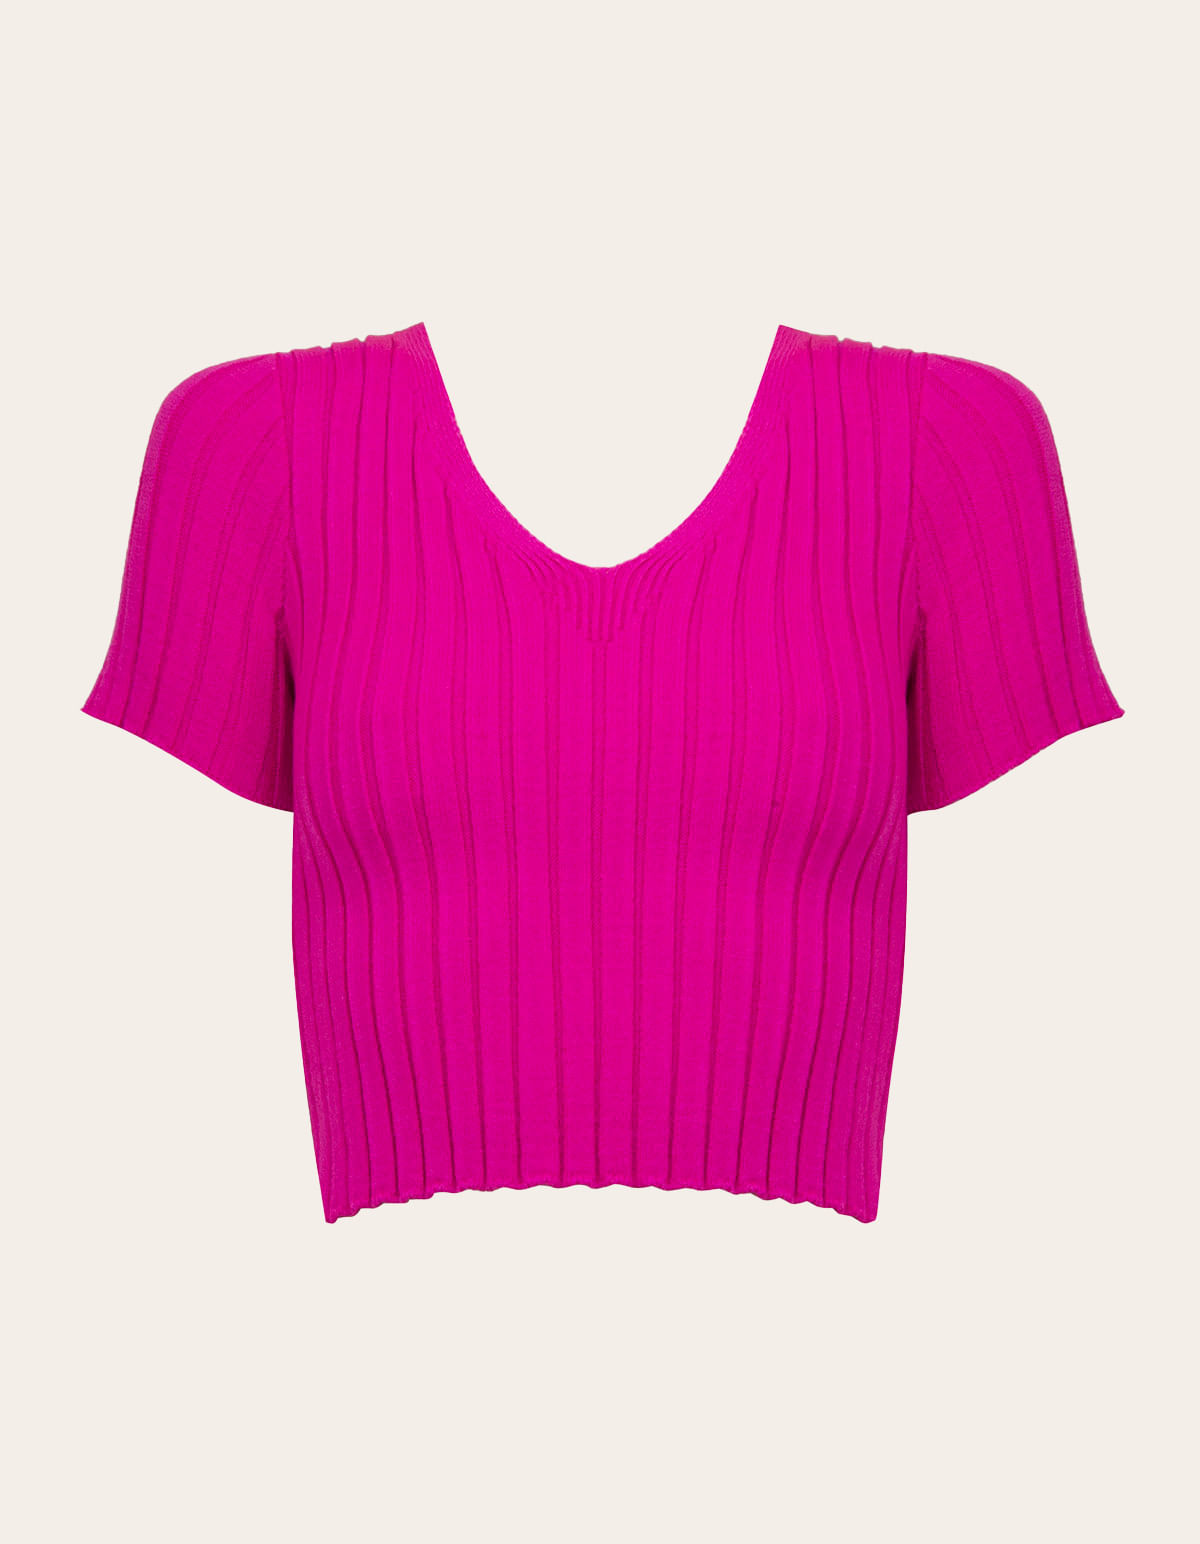 Blusa cropped tricot dec v rosa chiclete - LucyintheSky